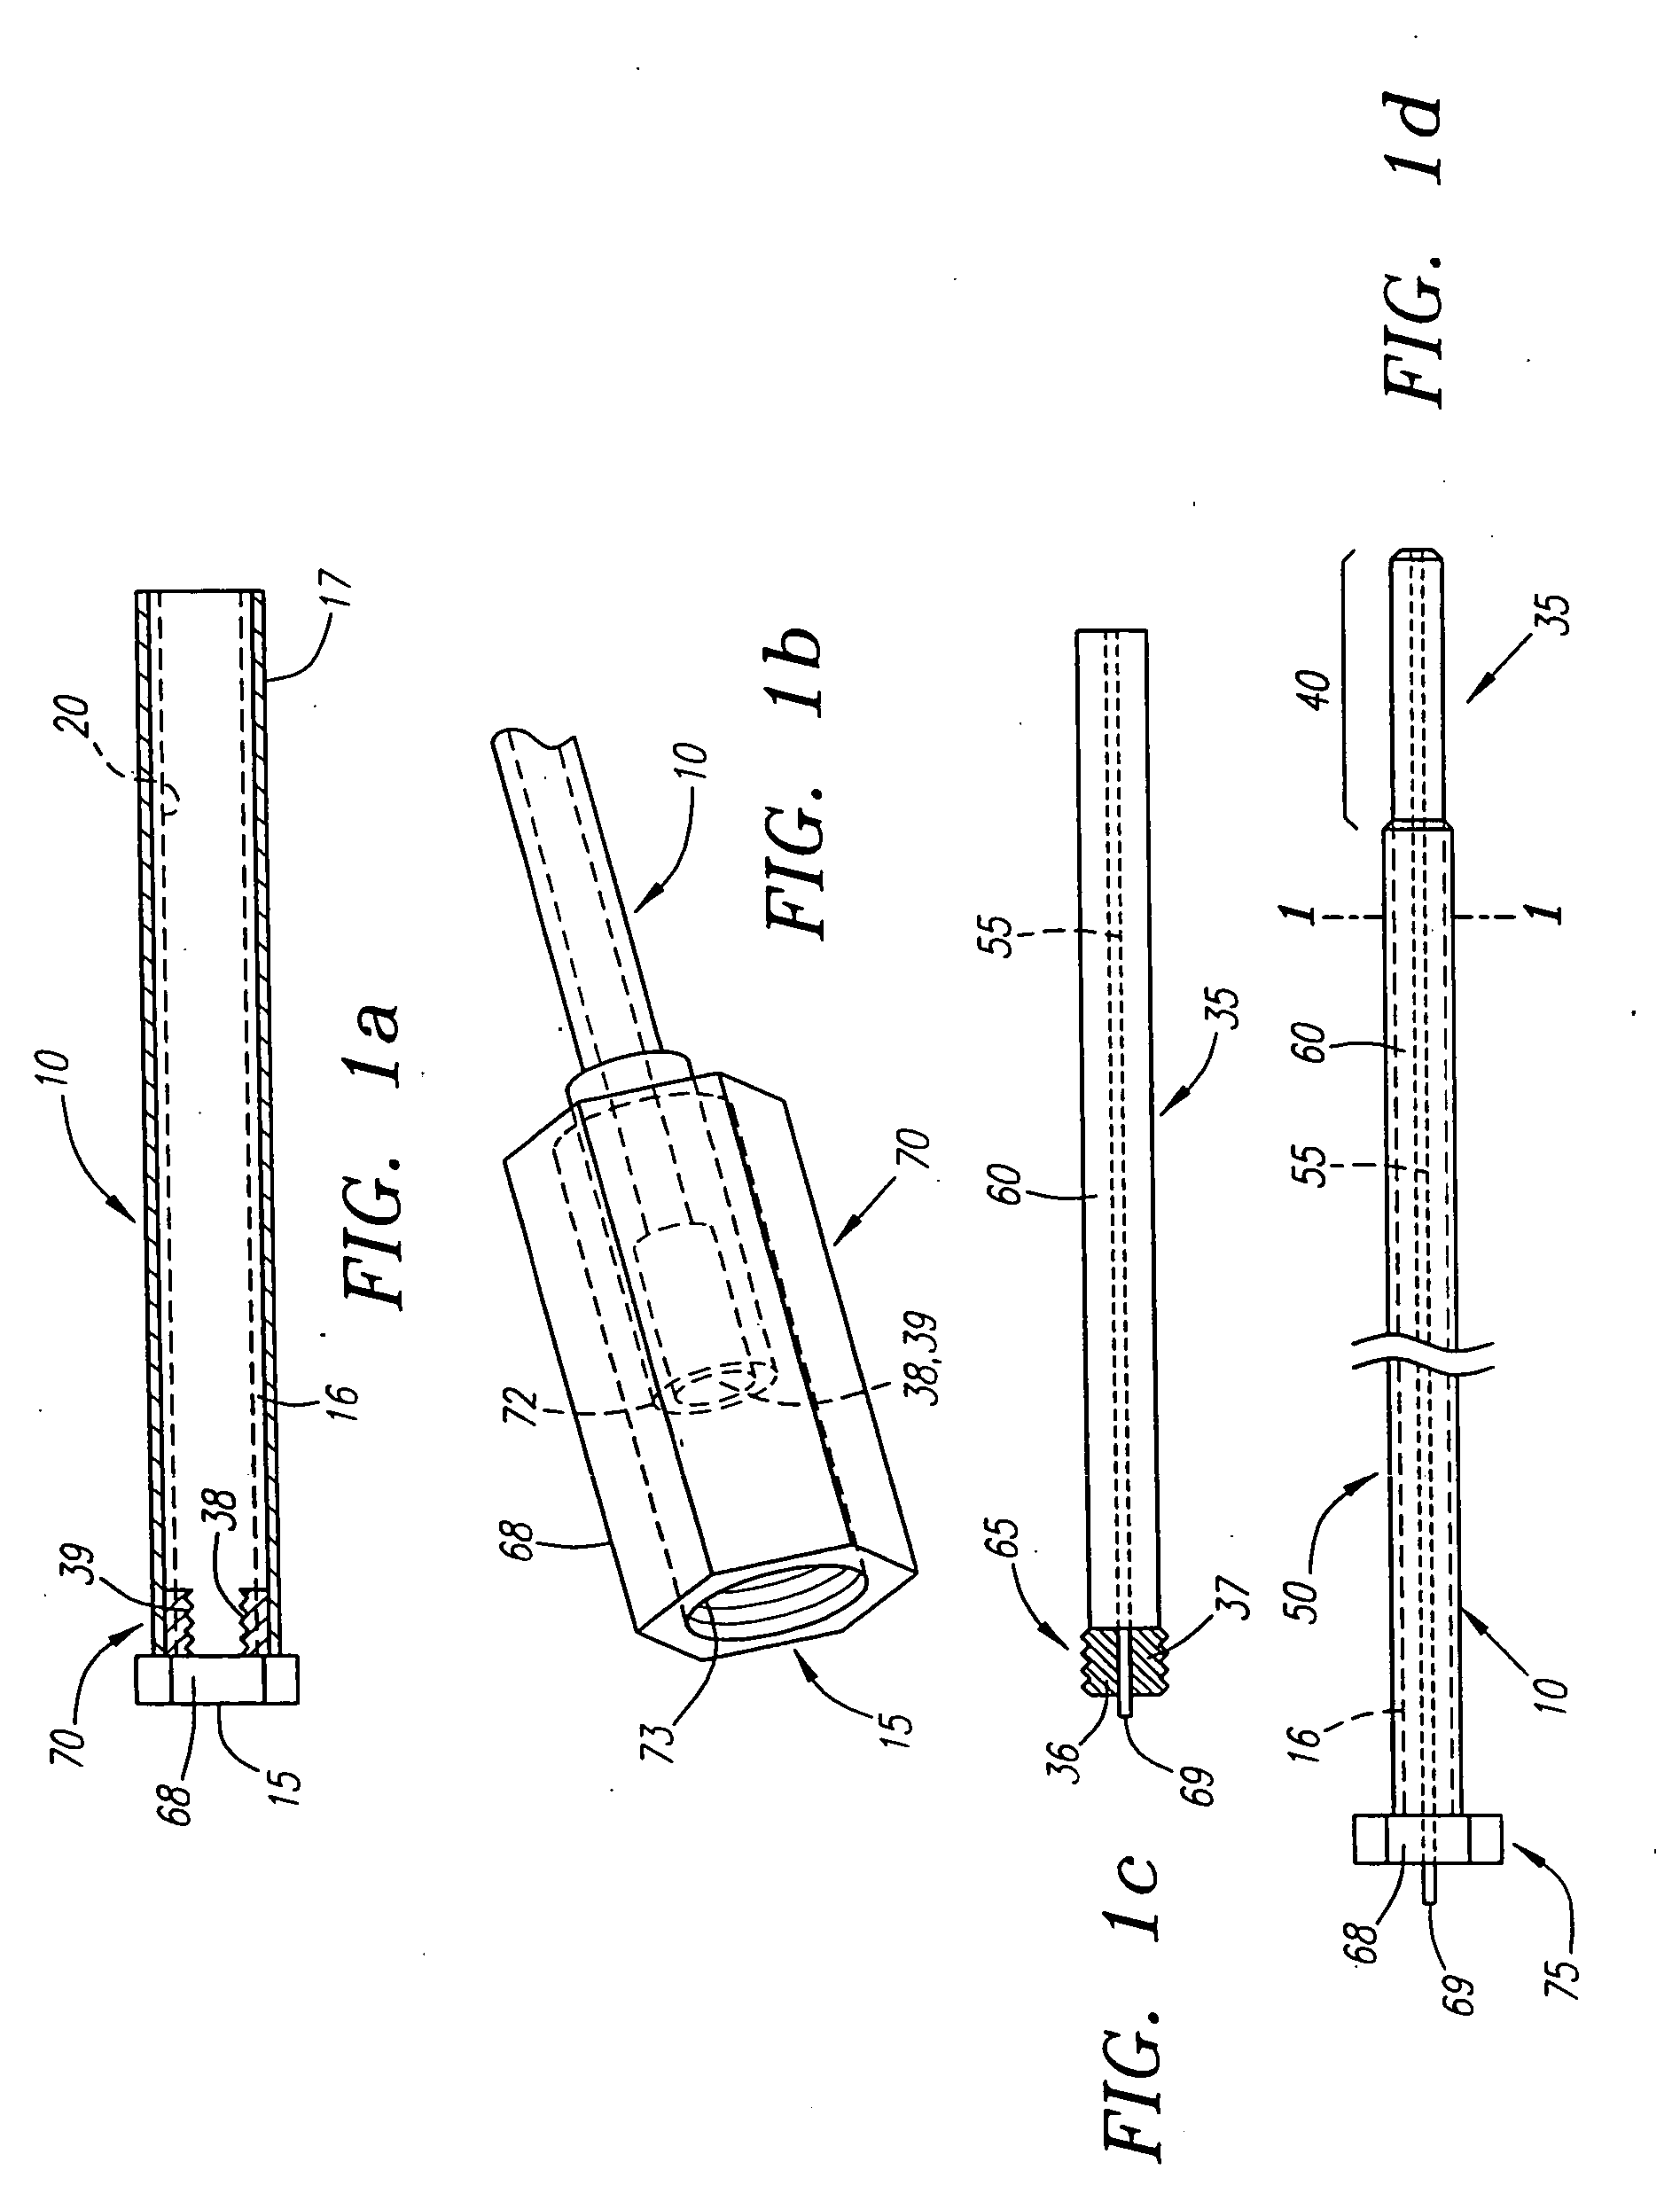 Needle kit and method for microwave ablation, track coagulation, and biopsy